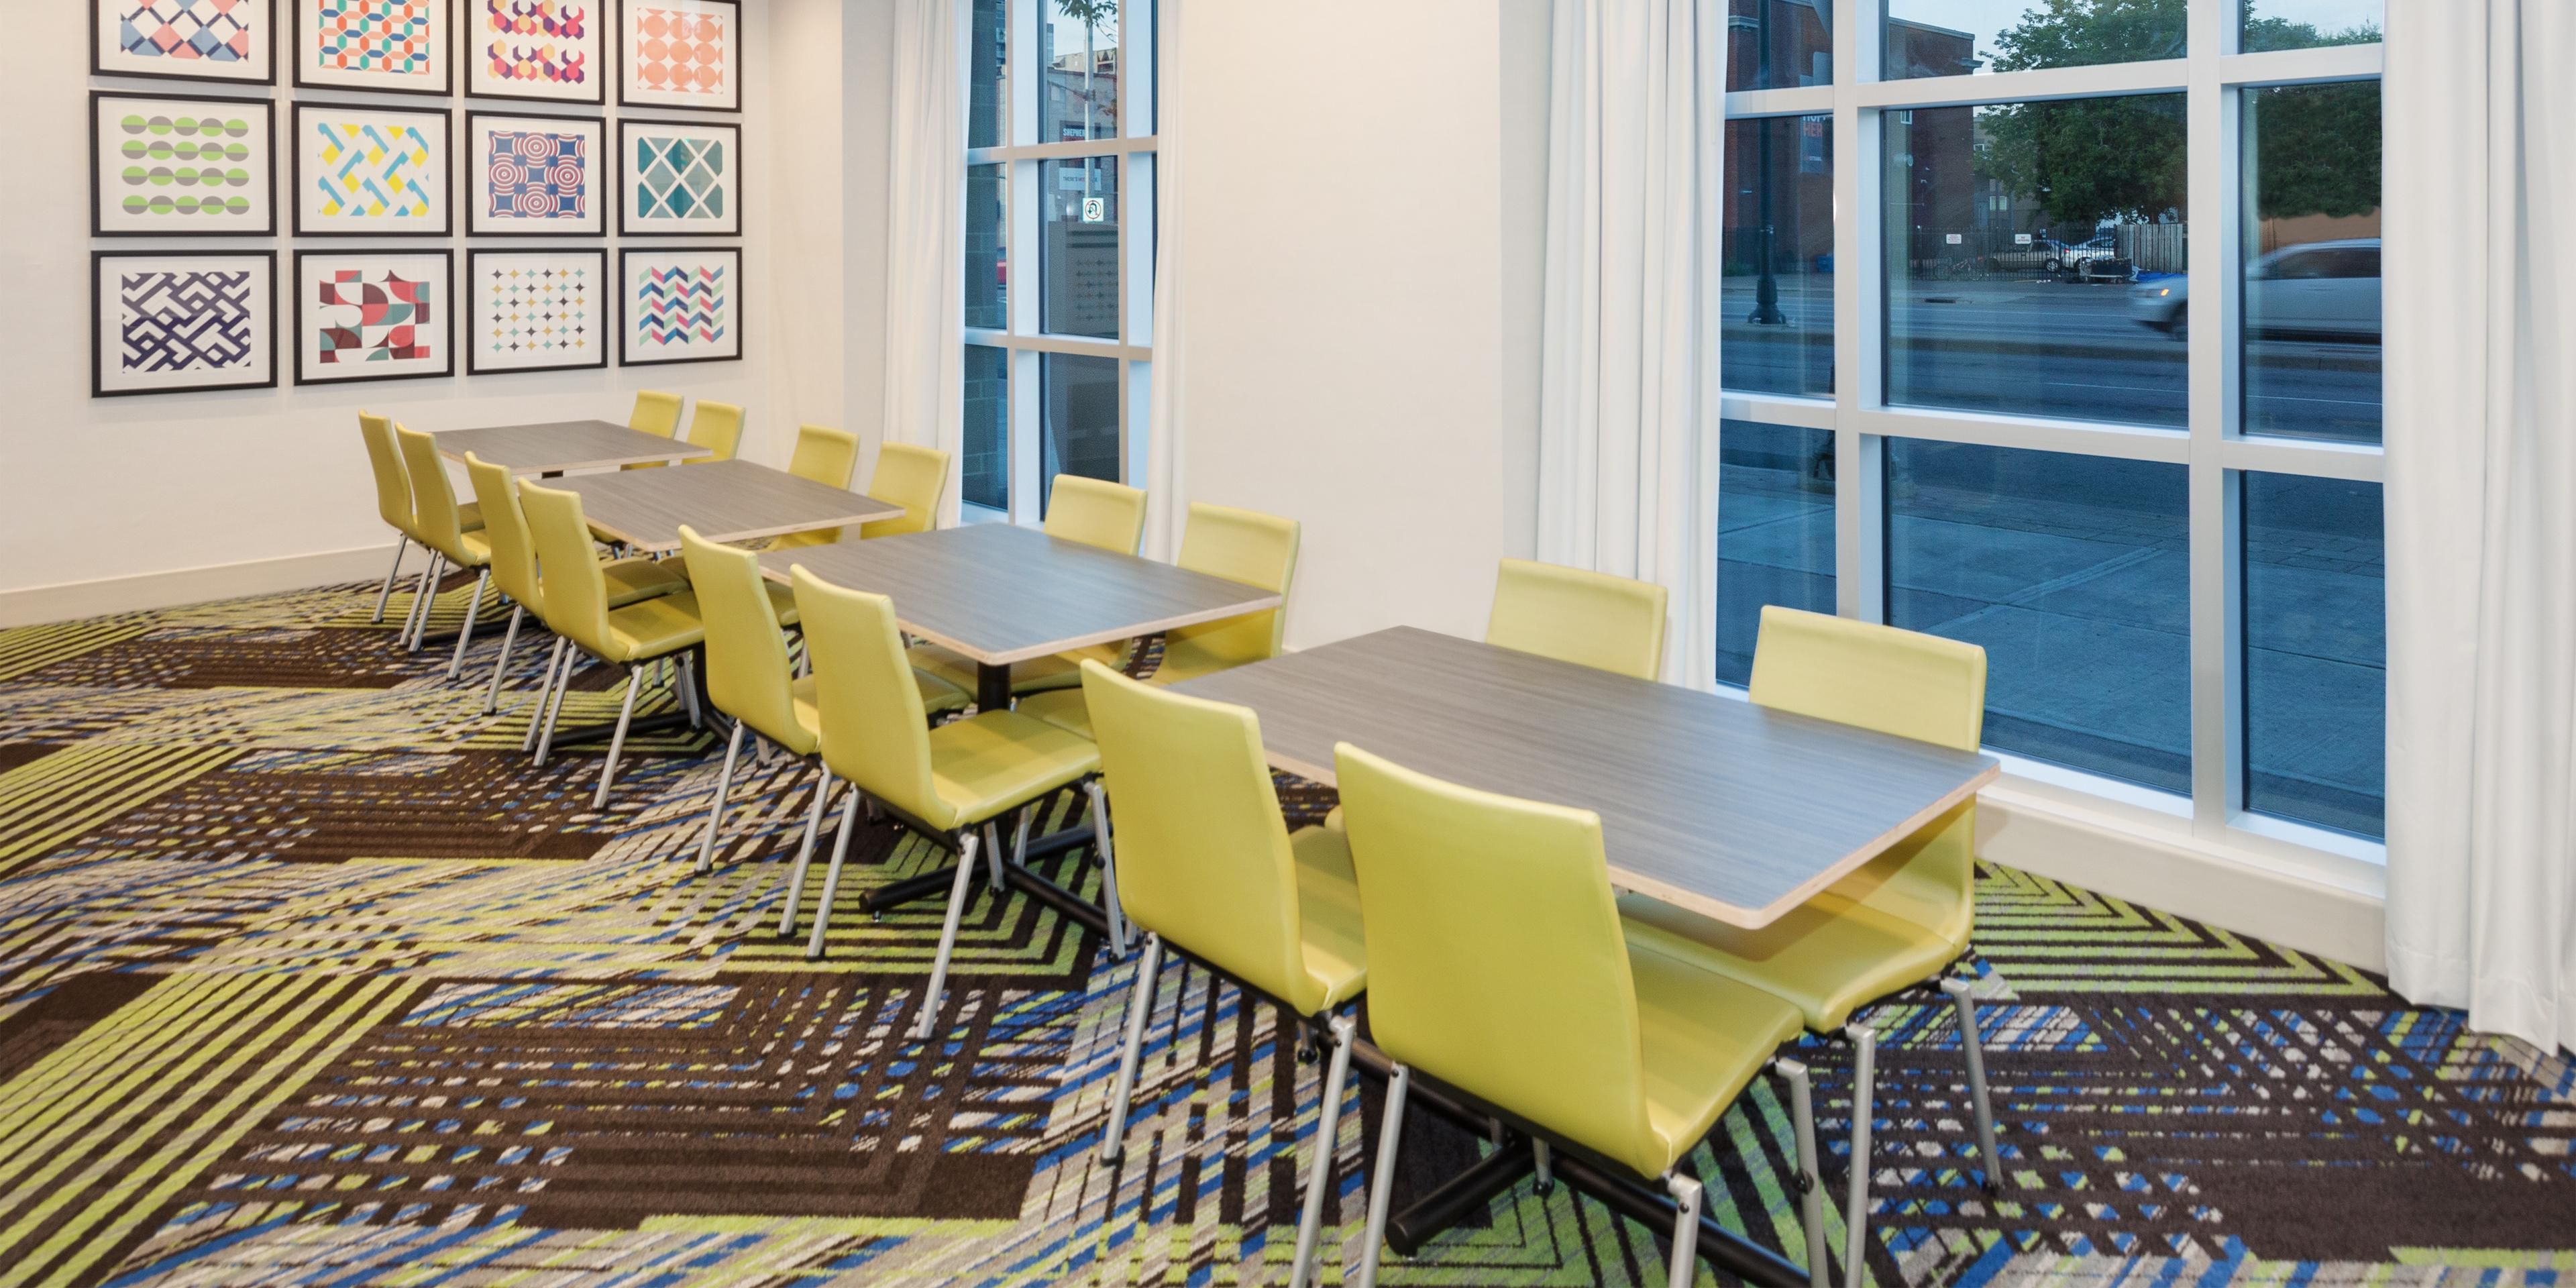 Experience our versatile 1,200 square feet of space for your next event.  Perfect for small to medium-sized groups. We will work with you to set up all the essentials you need for your meeting including catering and A/V equipment.